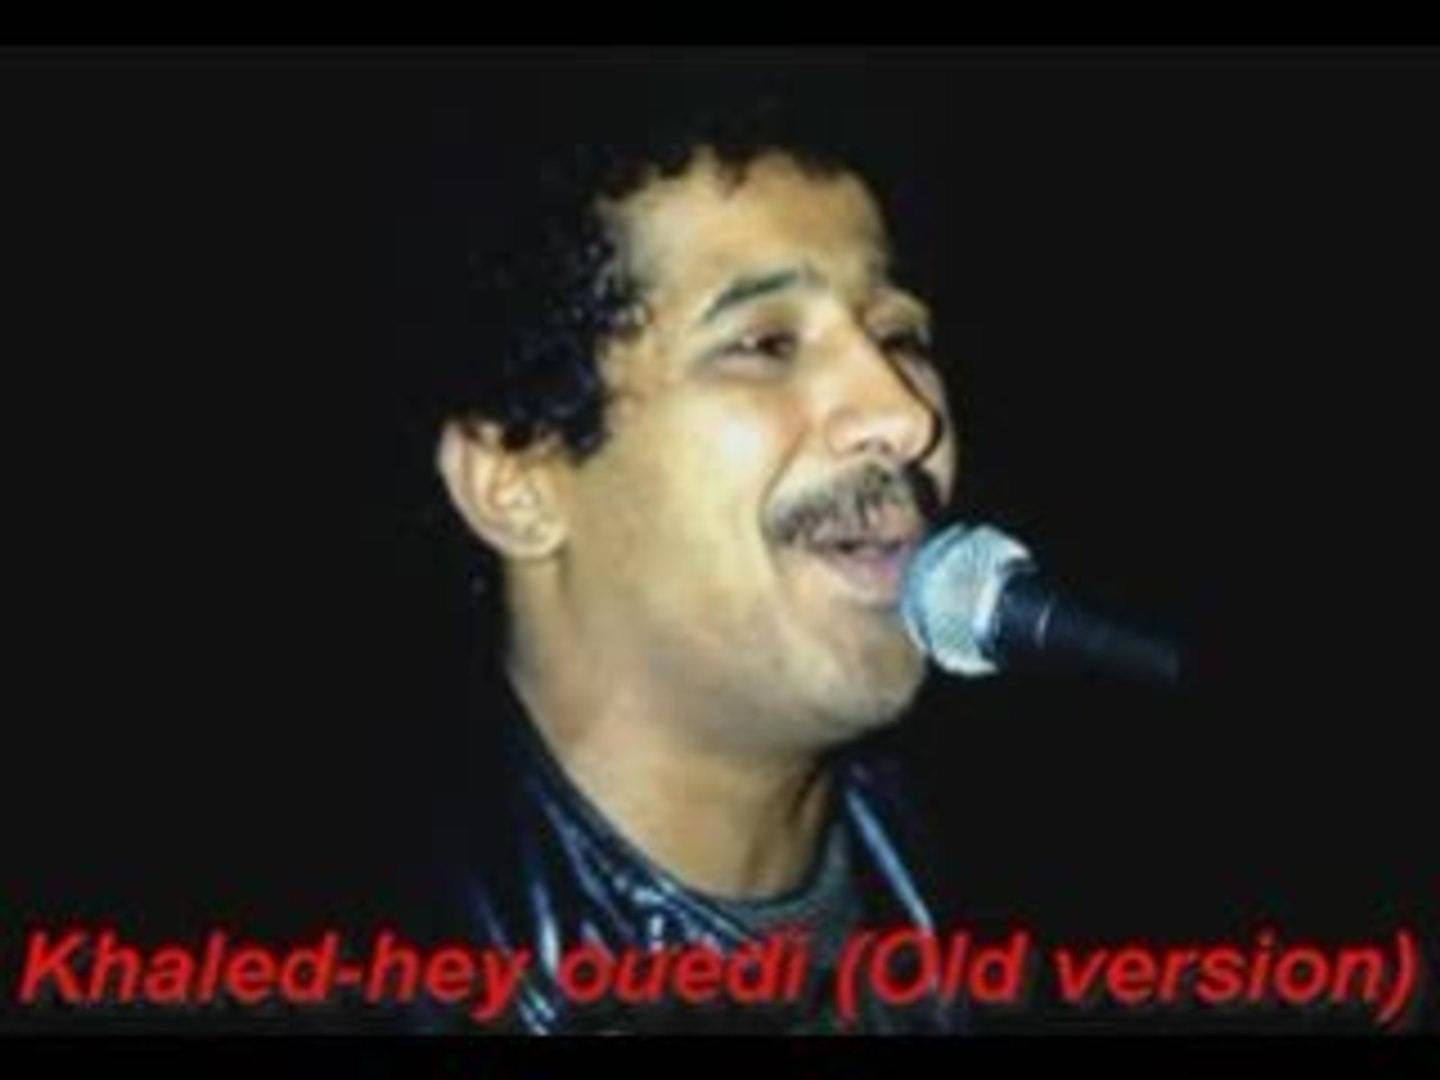 cheb Khaled "hey ouedi" (Old version) - Vidéo Dailymotion